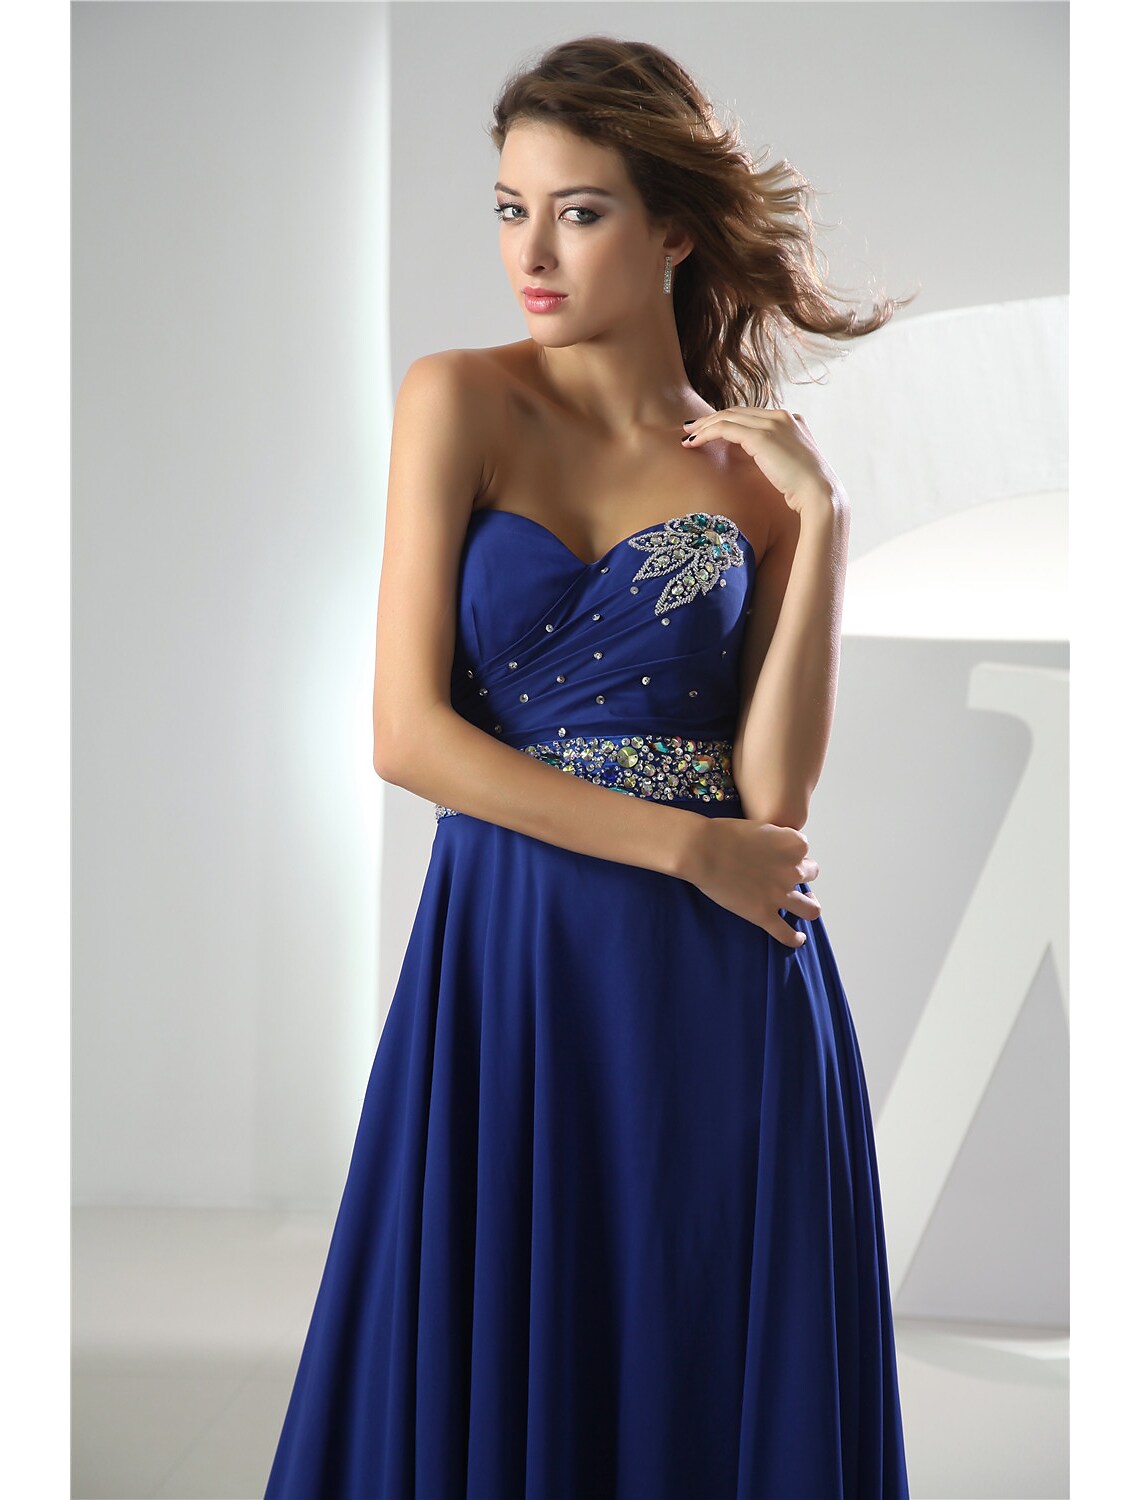 A-Line Evening Gown Dress Wedding Floor Length Sleeveless Sweetheart Chiffon with Crystals